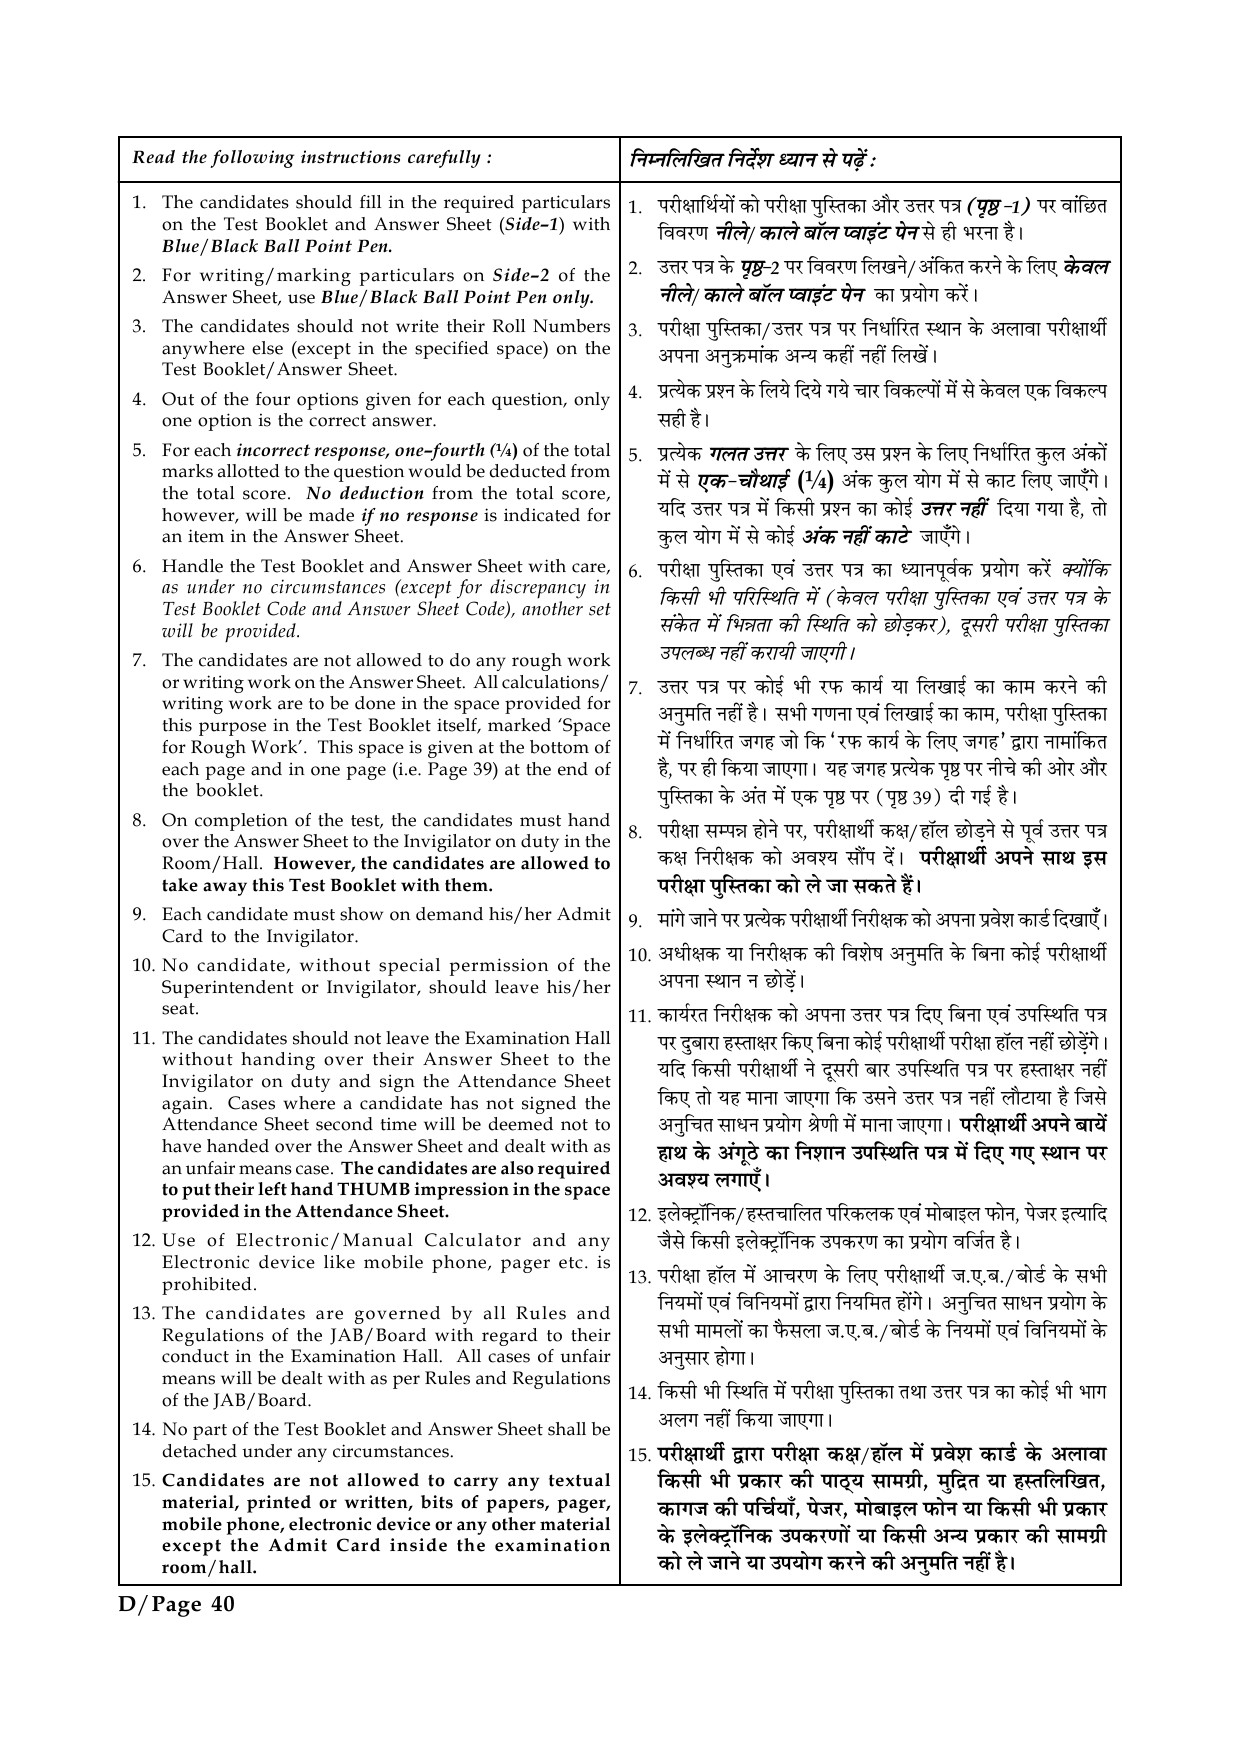 JEE Main Exam Question Paper 2015 Booklet D 39